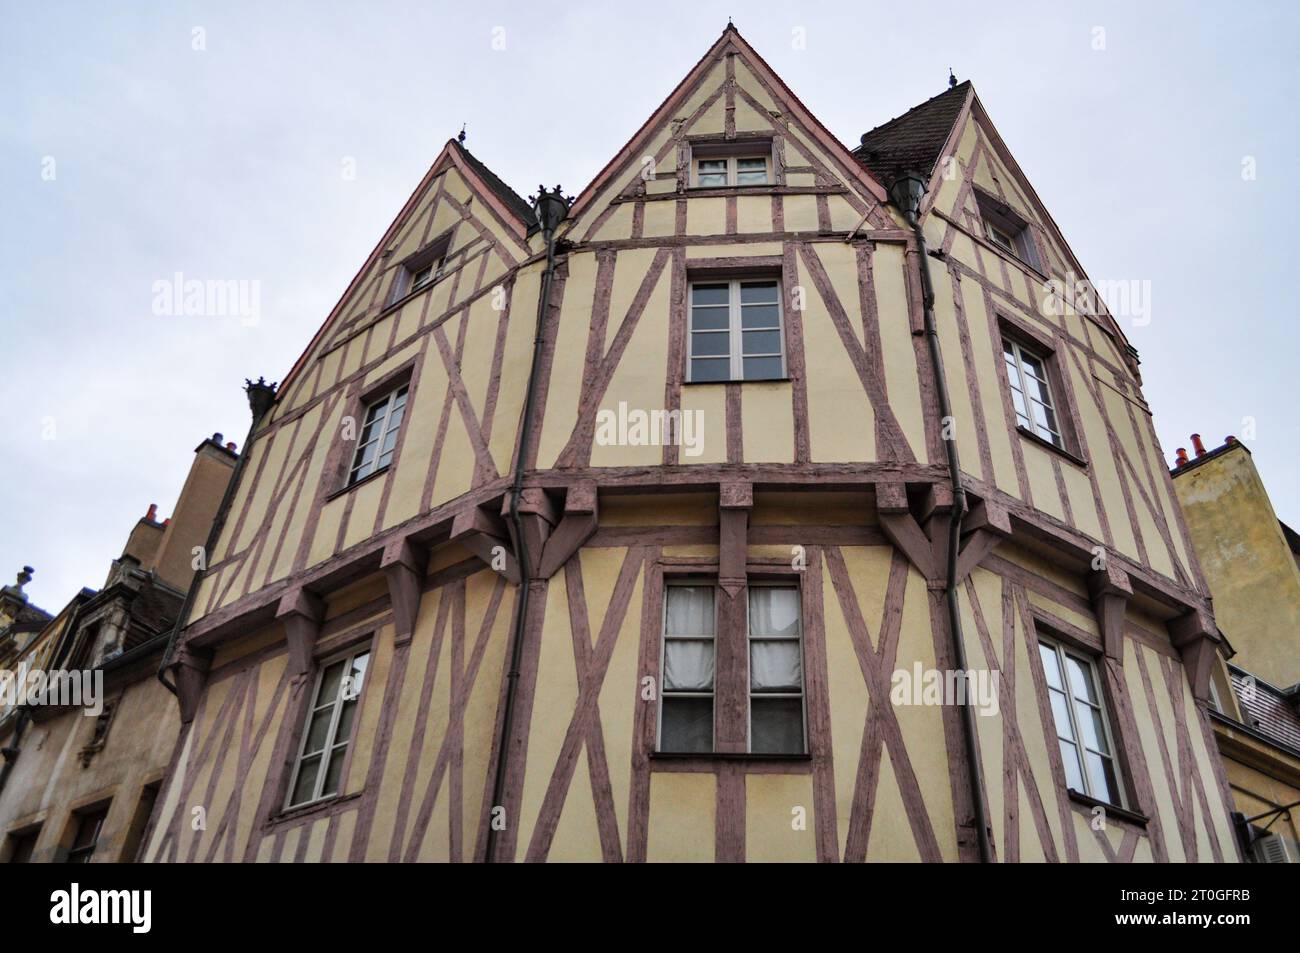 Half-timbered facade of houses in the old town of Dijon, France with three pointed triangular roofs Stock Photo